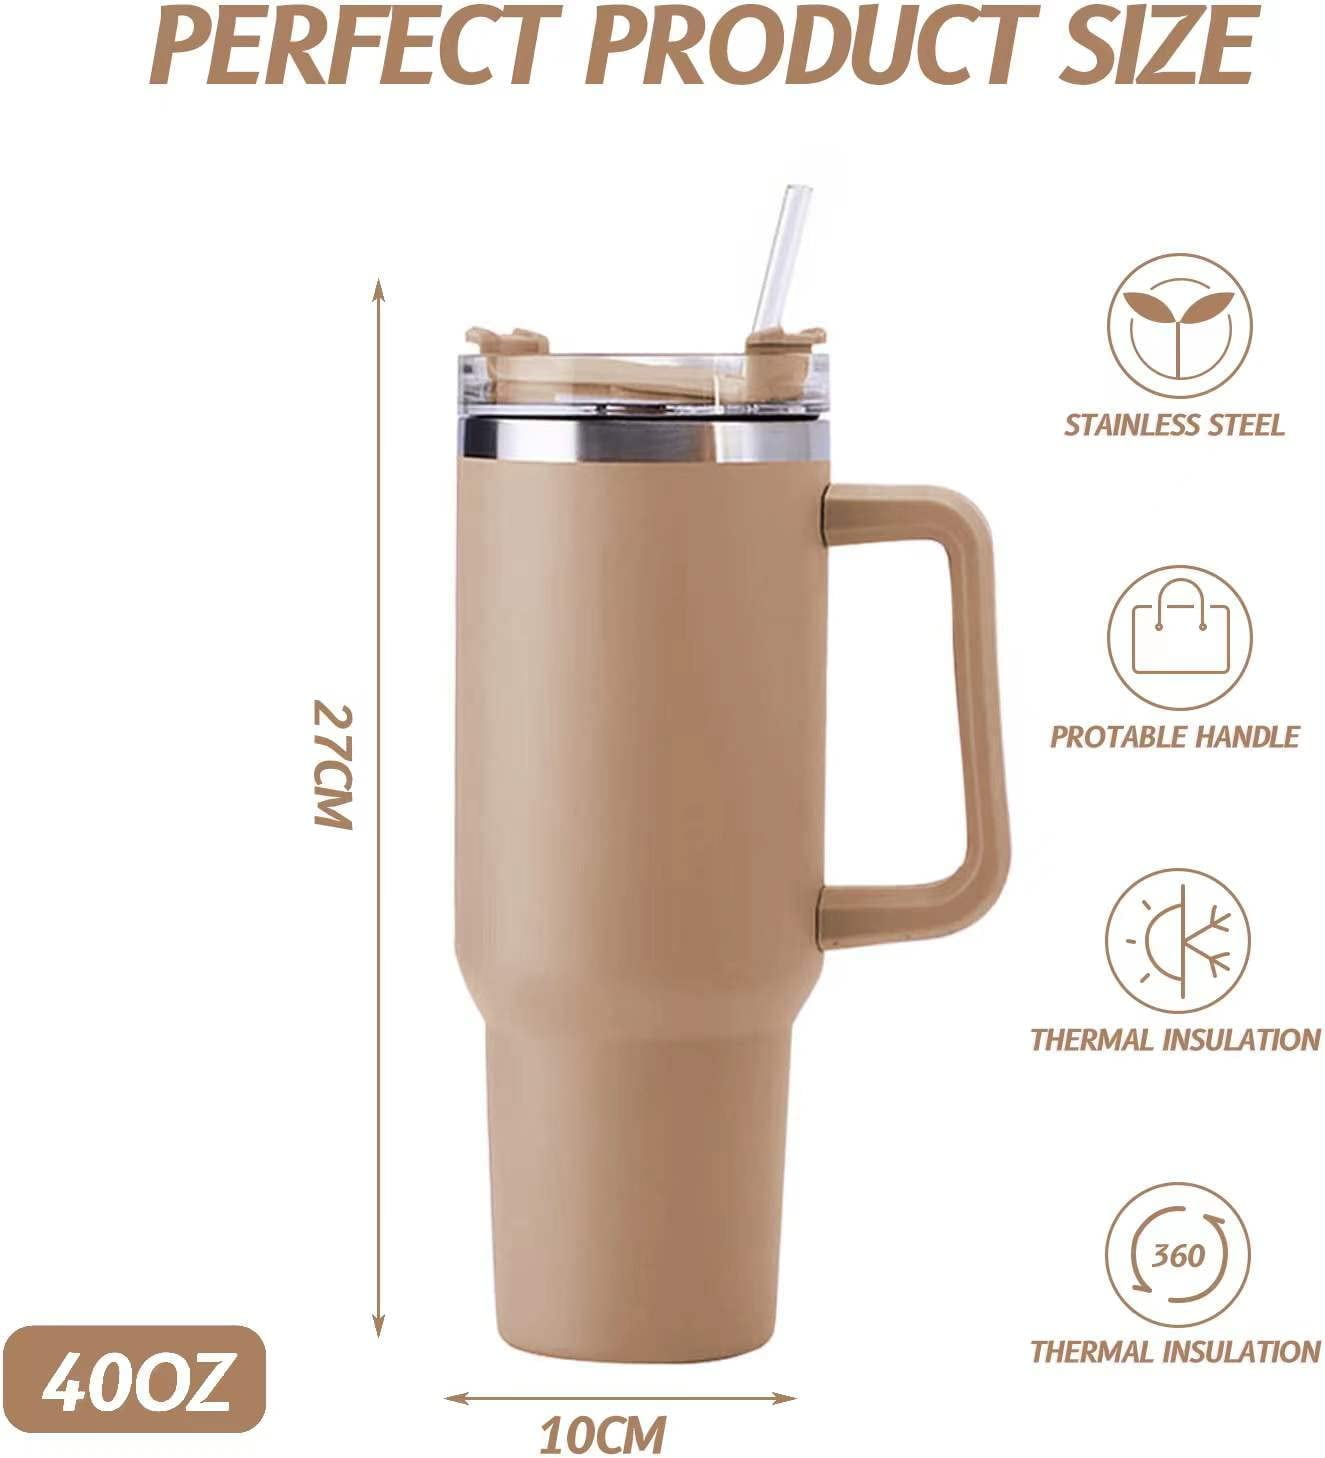 Murmioo 40OZ Tumbler with Handle and Straw,Insulated Leak Proof Double  Walled Stainless Steel Travel…See more Murmioo 40OZ Tumbler with Handle and